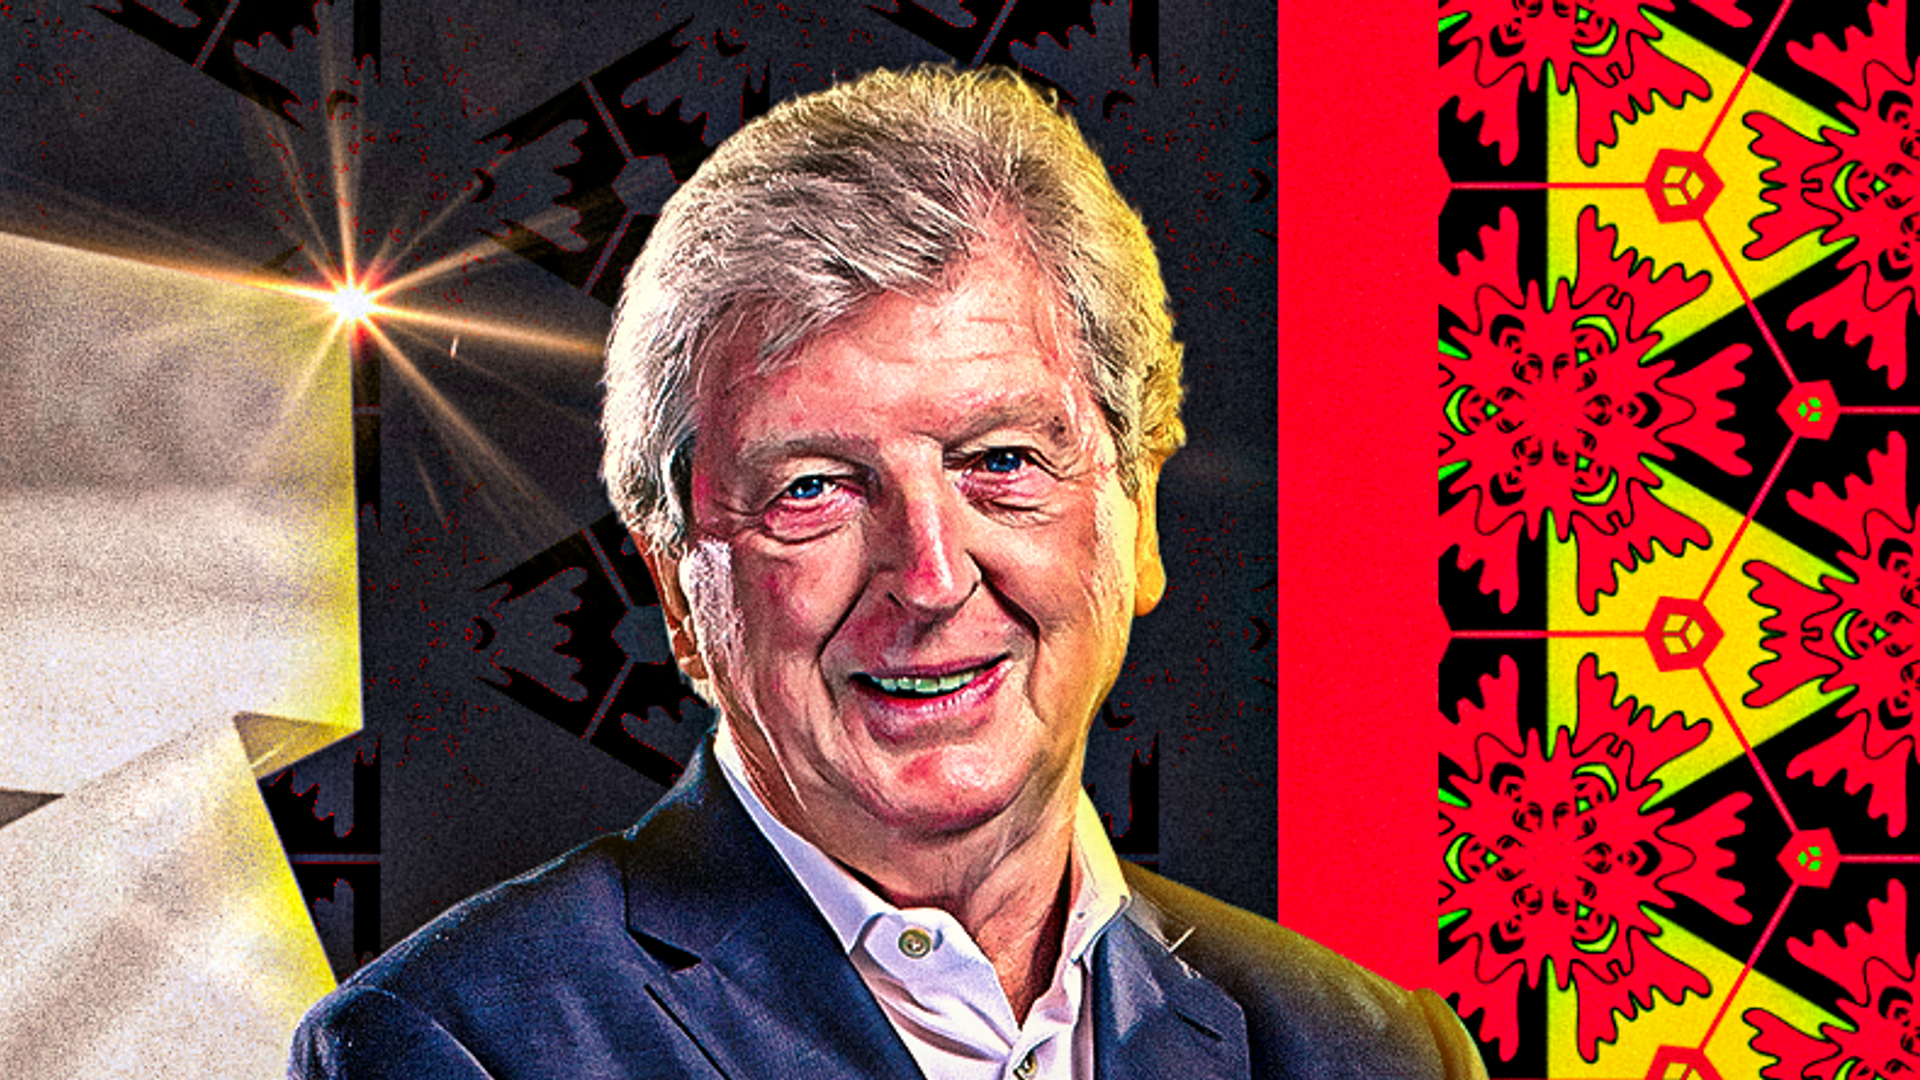 Roy Hodgson: Watford appoint former England boss as new manager on deal until end of season